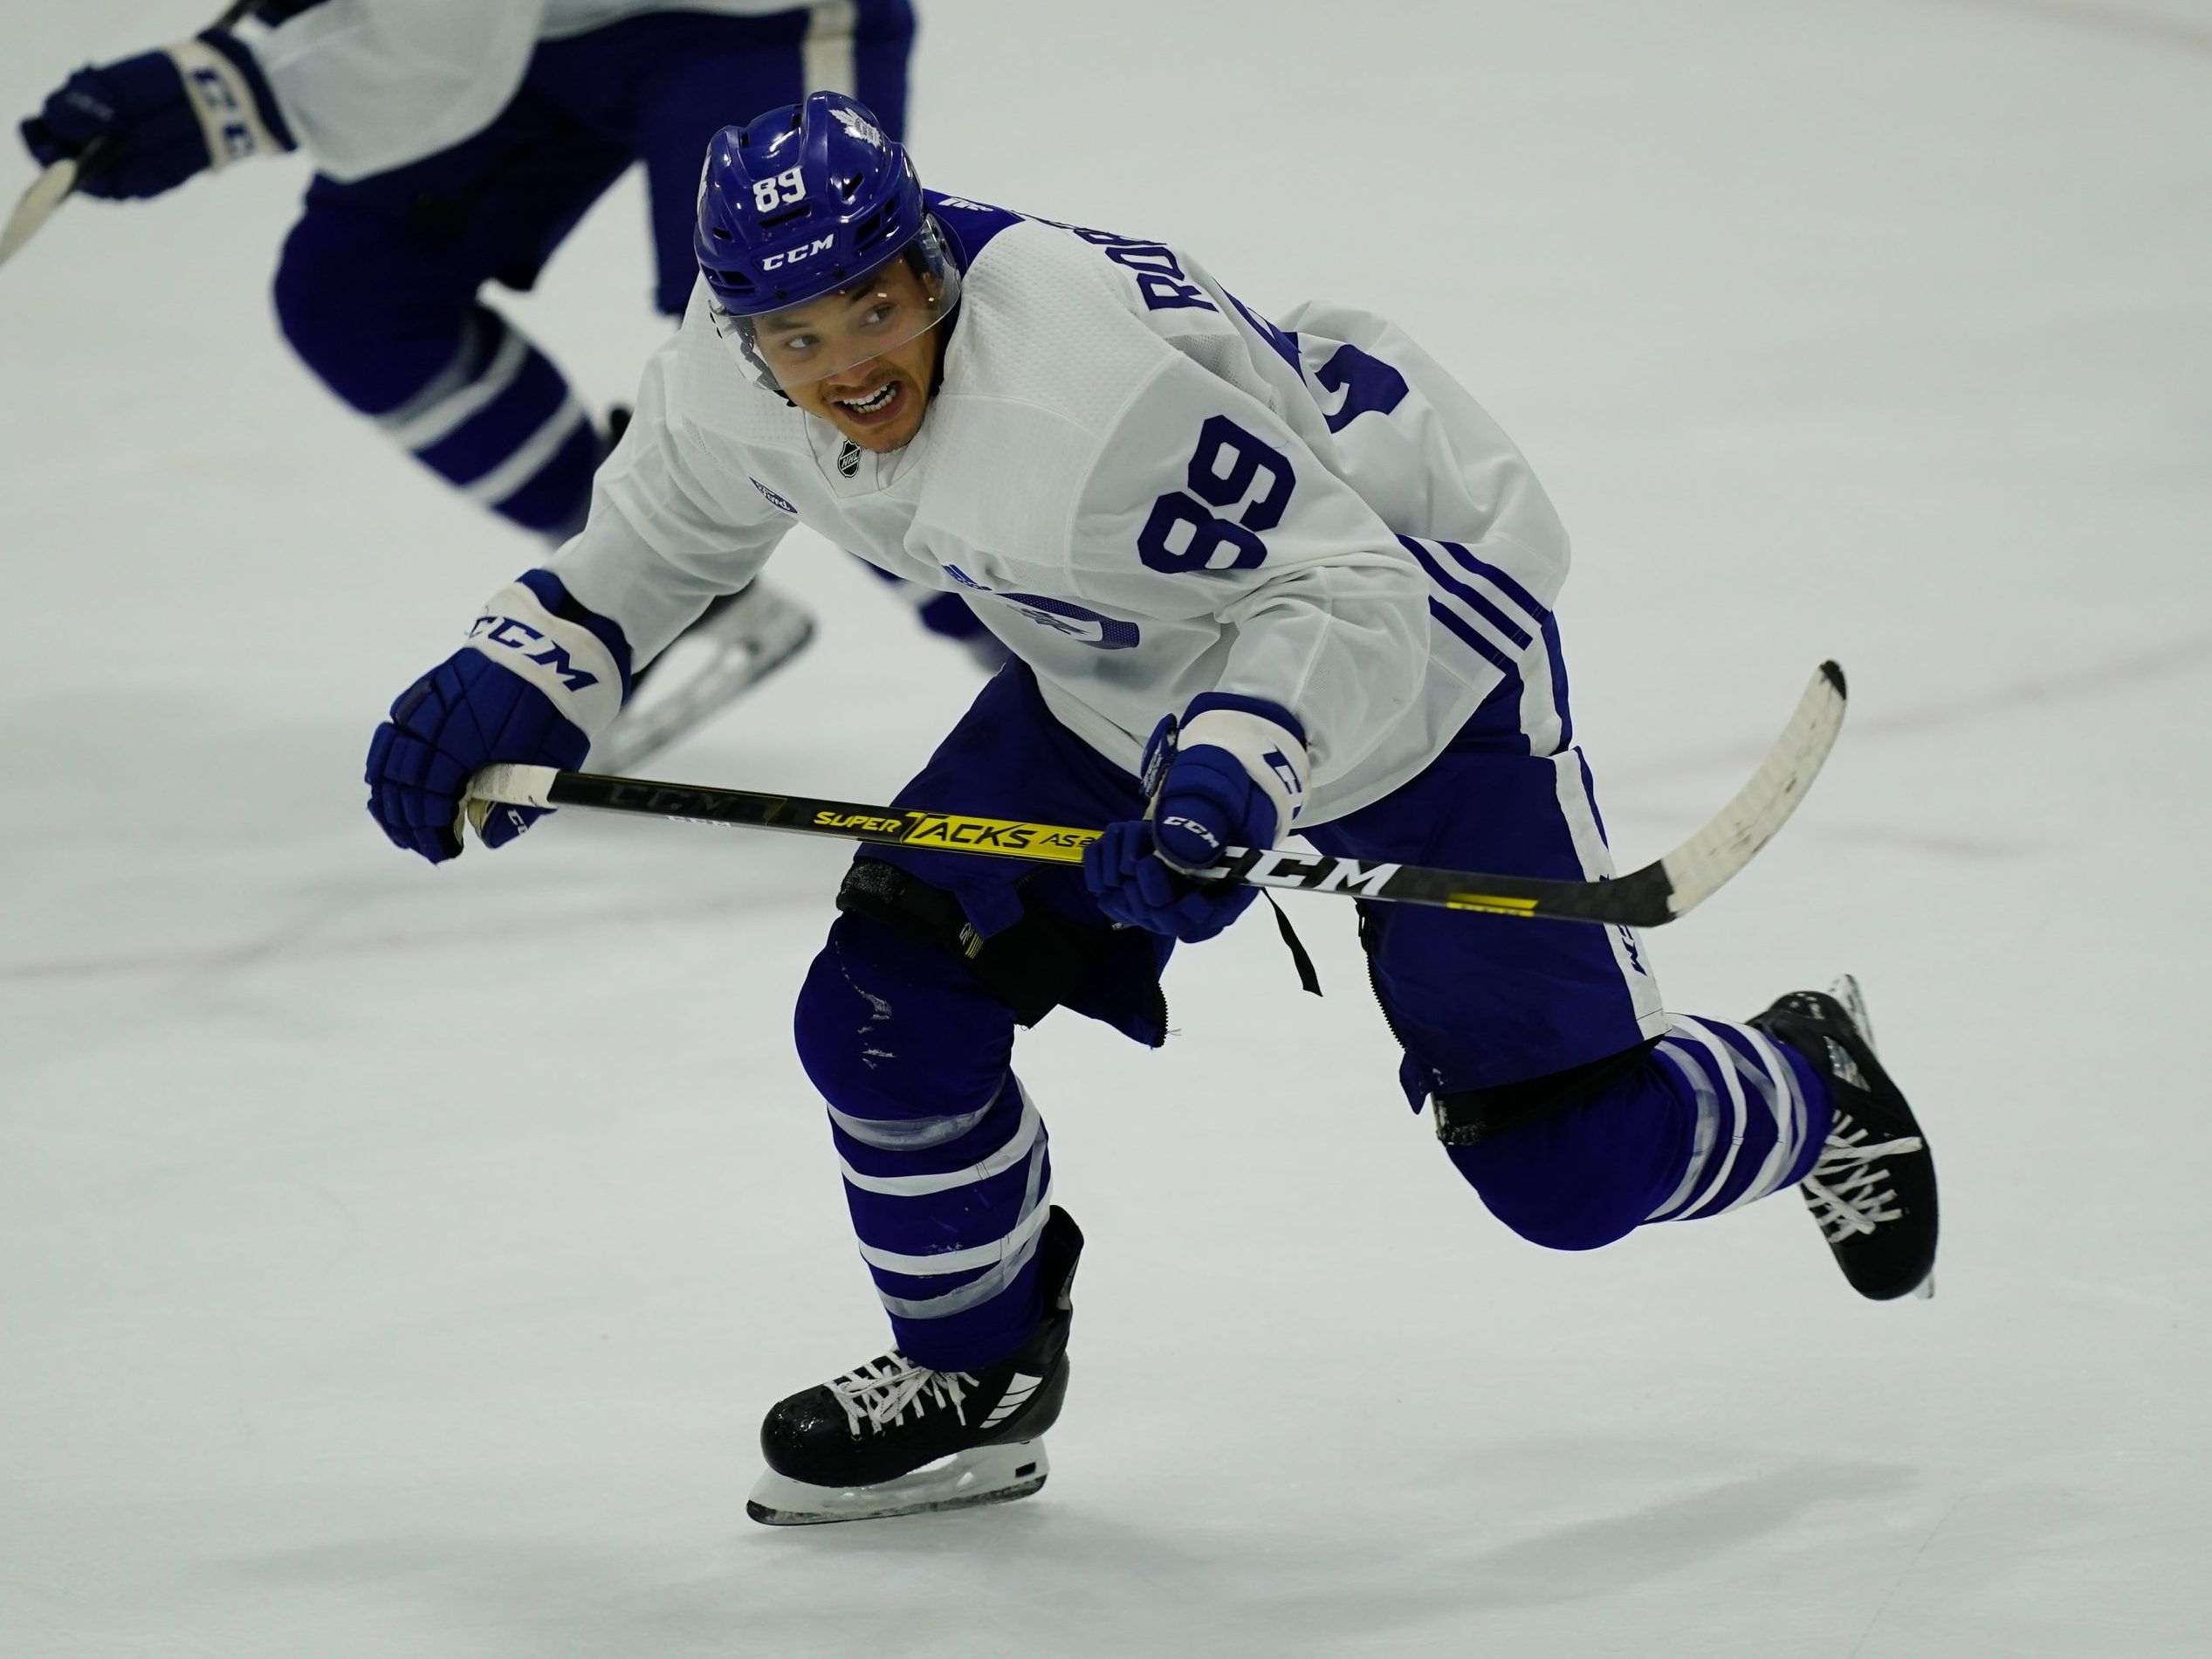 Maple Leafs Prospect Robertson Hopes to Make an Impact – On and